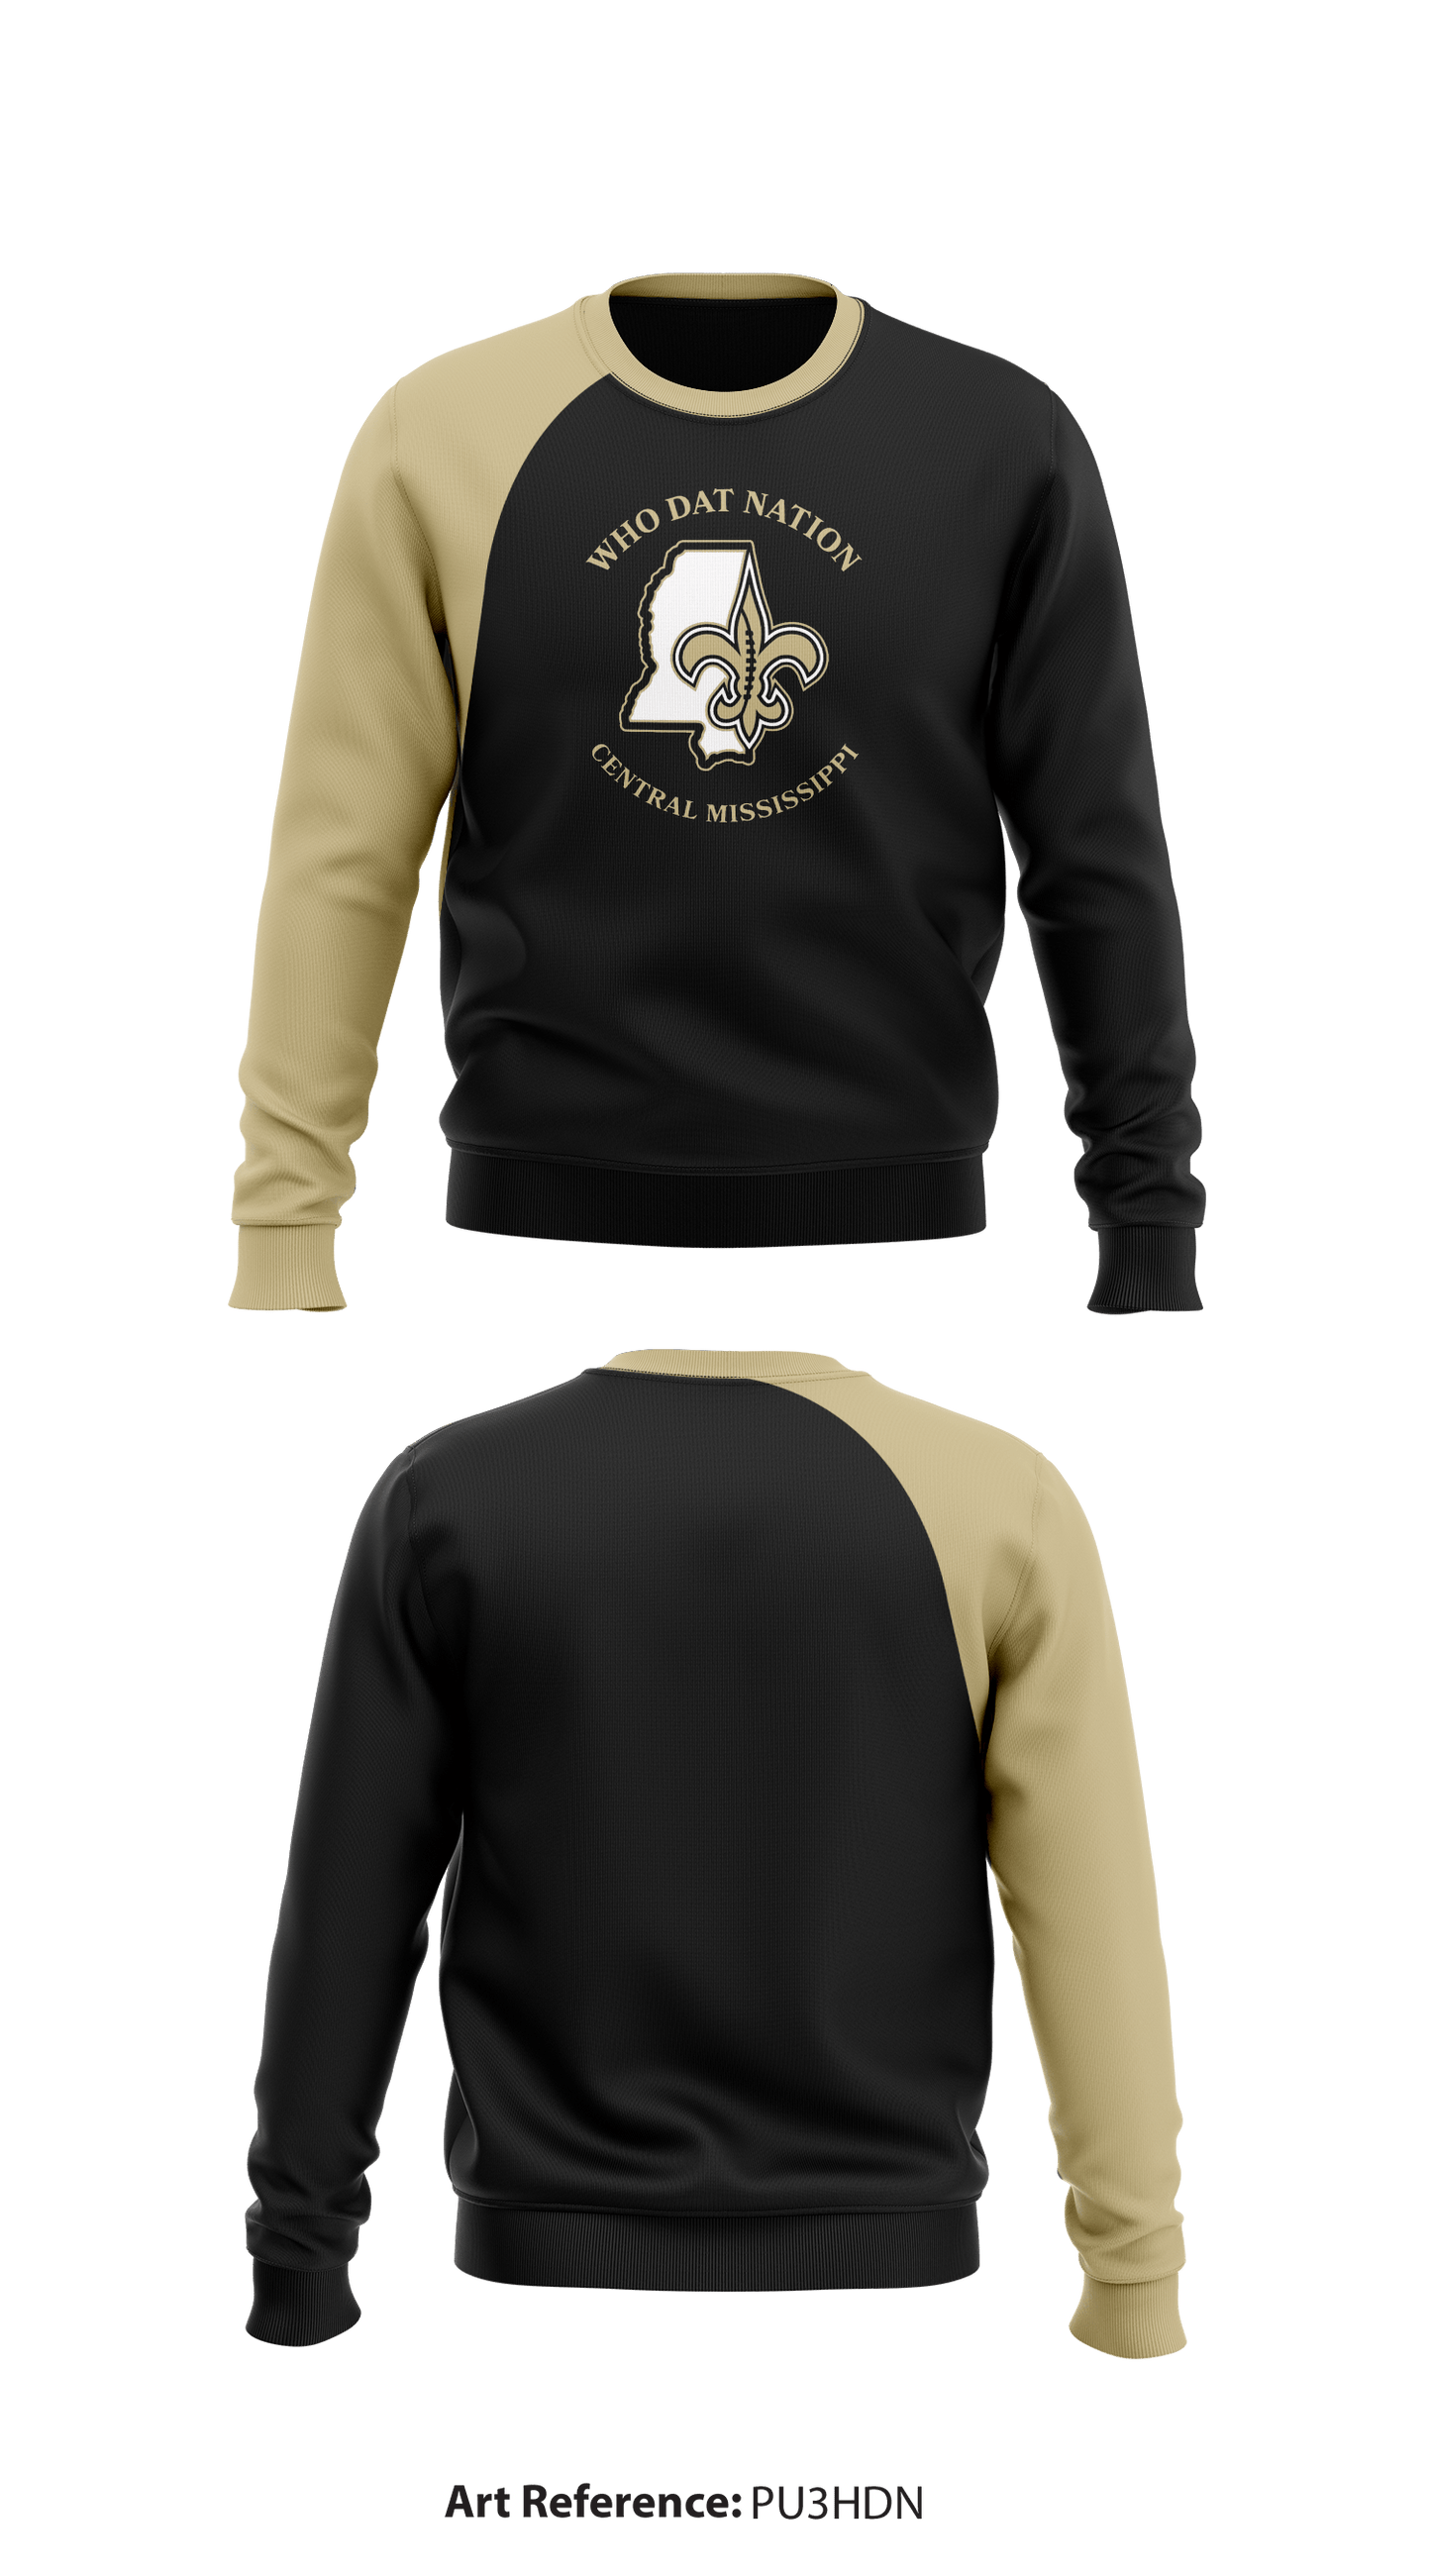 Who Dat Nations of Central Mississippi Store 1 Core Men's Crewneck Performance Sweatshirt - pu3HDN